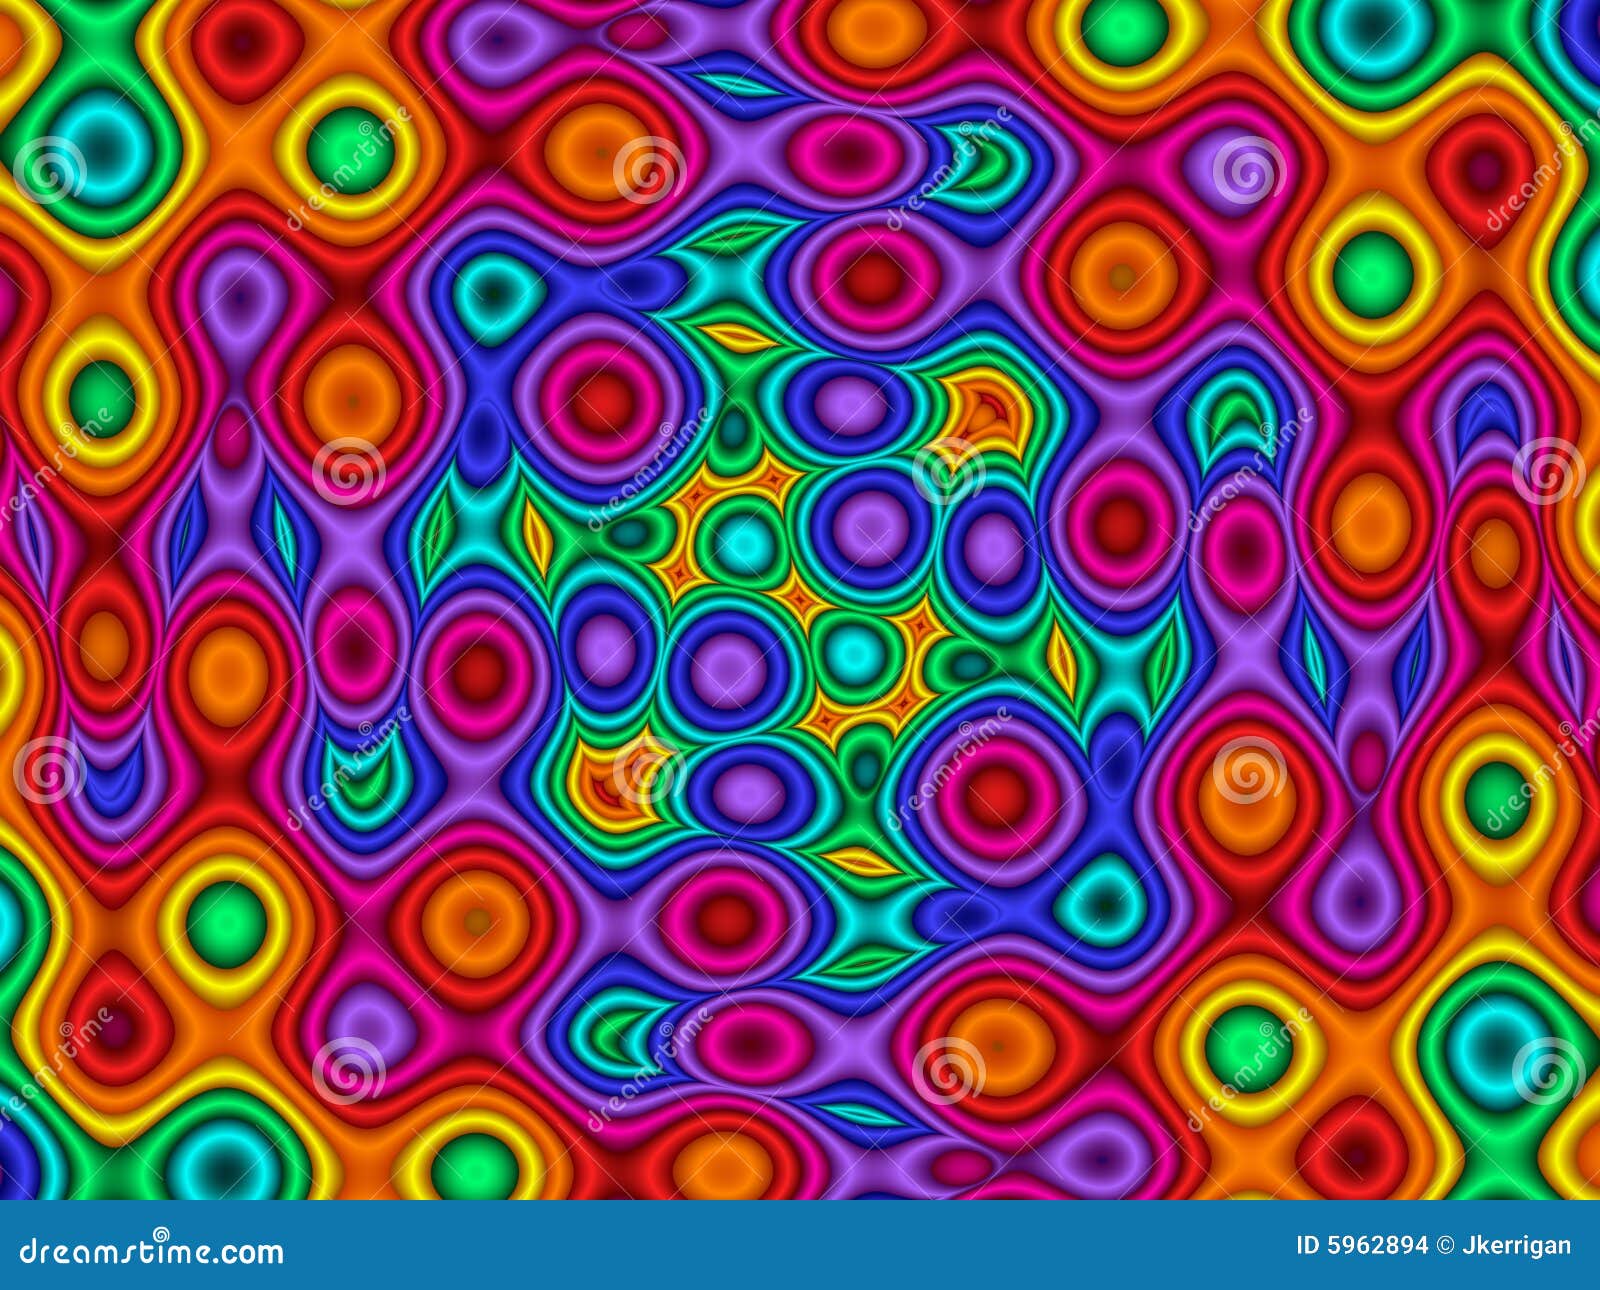 Groovy Rainbow Background Stock Images Image 5962894 HD Wallpapers Download Free Images Wallpaper [wallpaper981.blogspot.com]